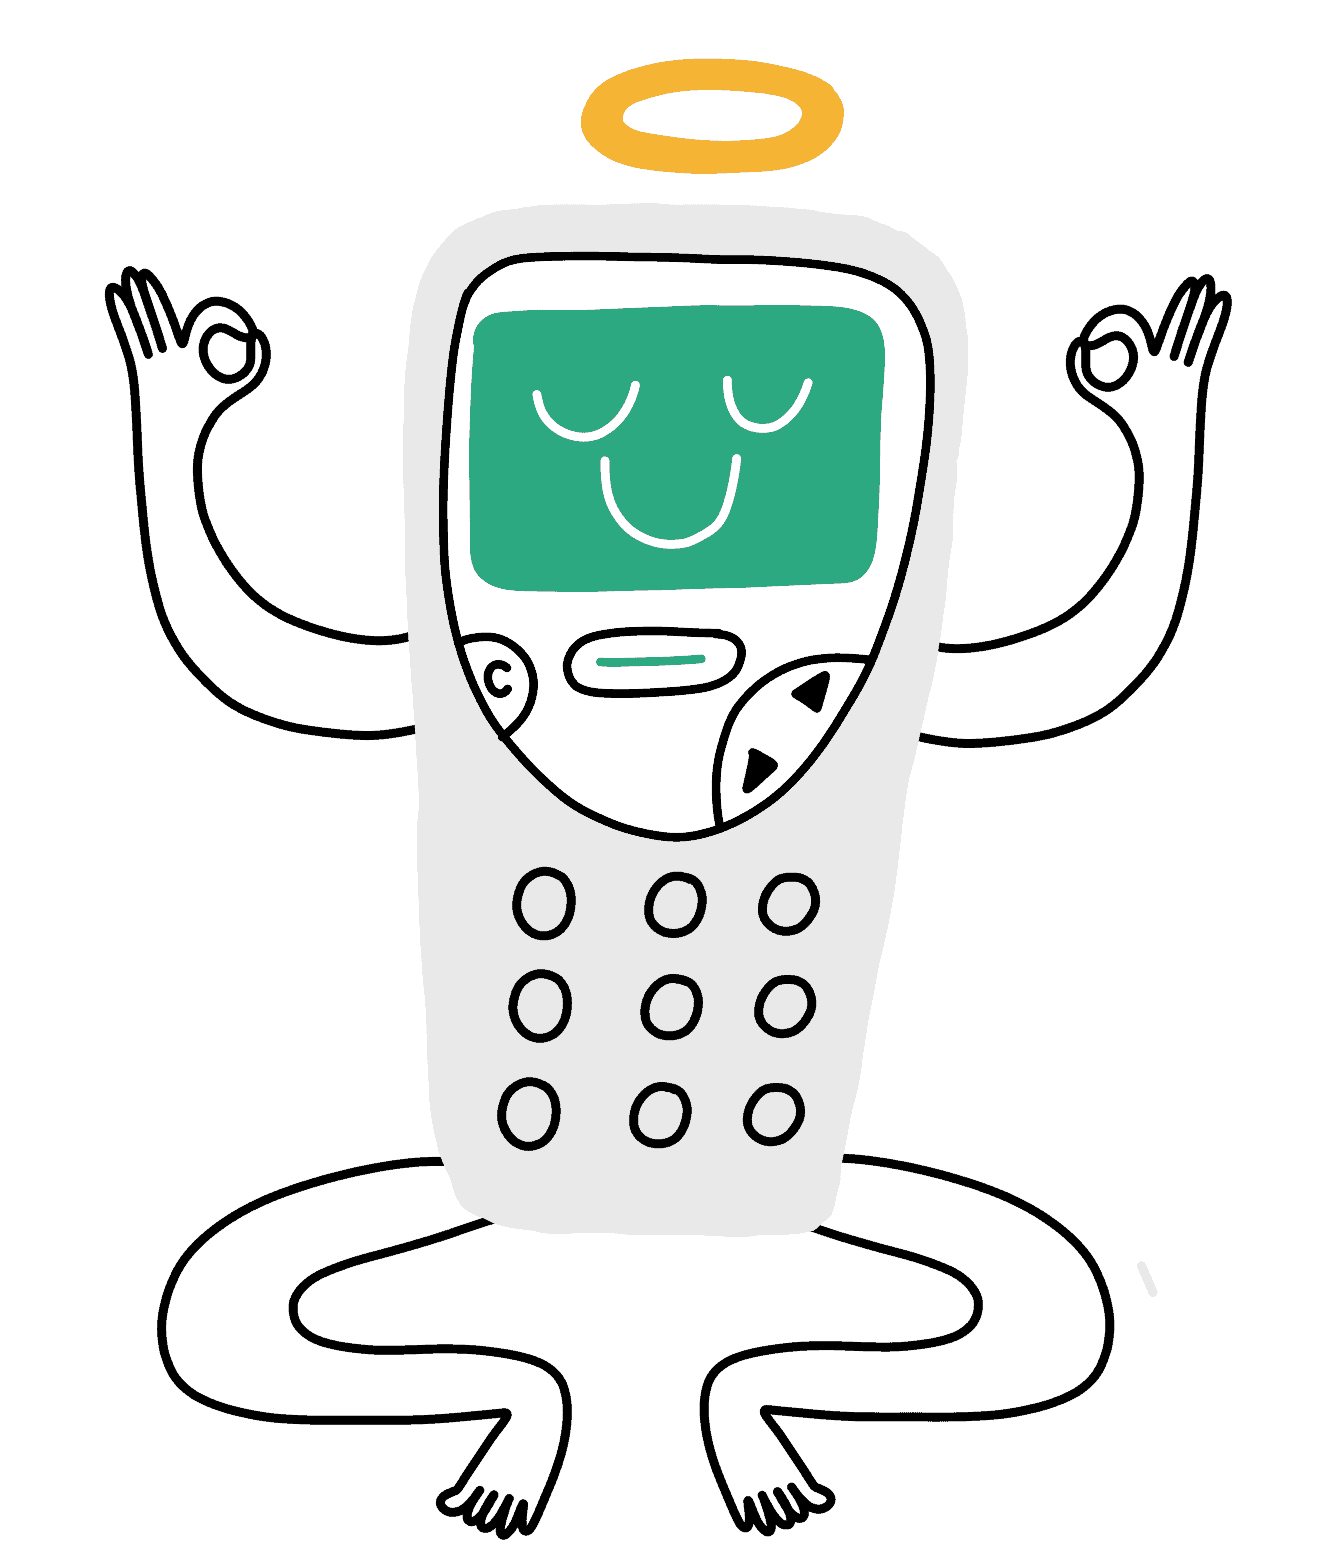 Cartoon of cell phone reaching nirvana, with only positive impacts and no downsides